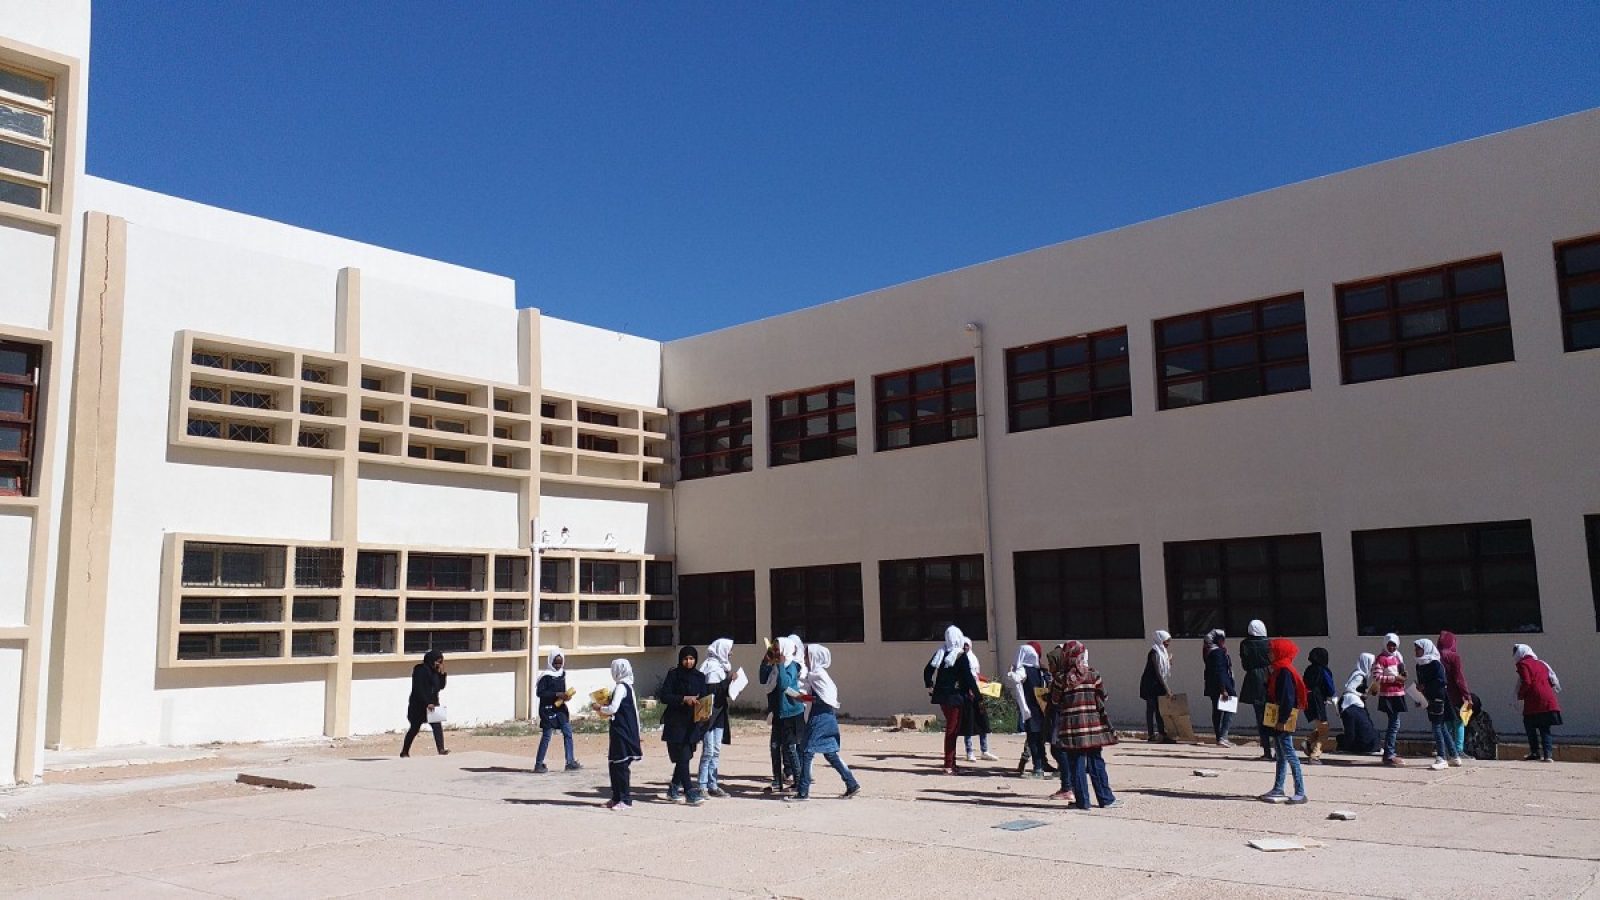 Alqurania School in Ubari reopened on 1 November 2017 after being closed for a year due to the damage caused by the conflict that took place in the city in 2014. Photos by Ali Alshareef/ ©UNDP Libya